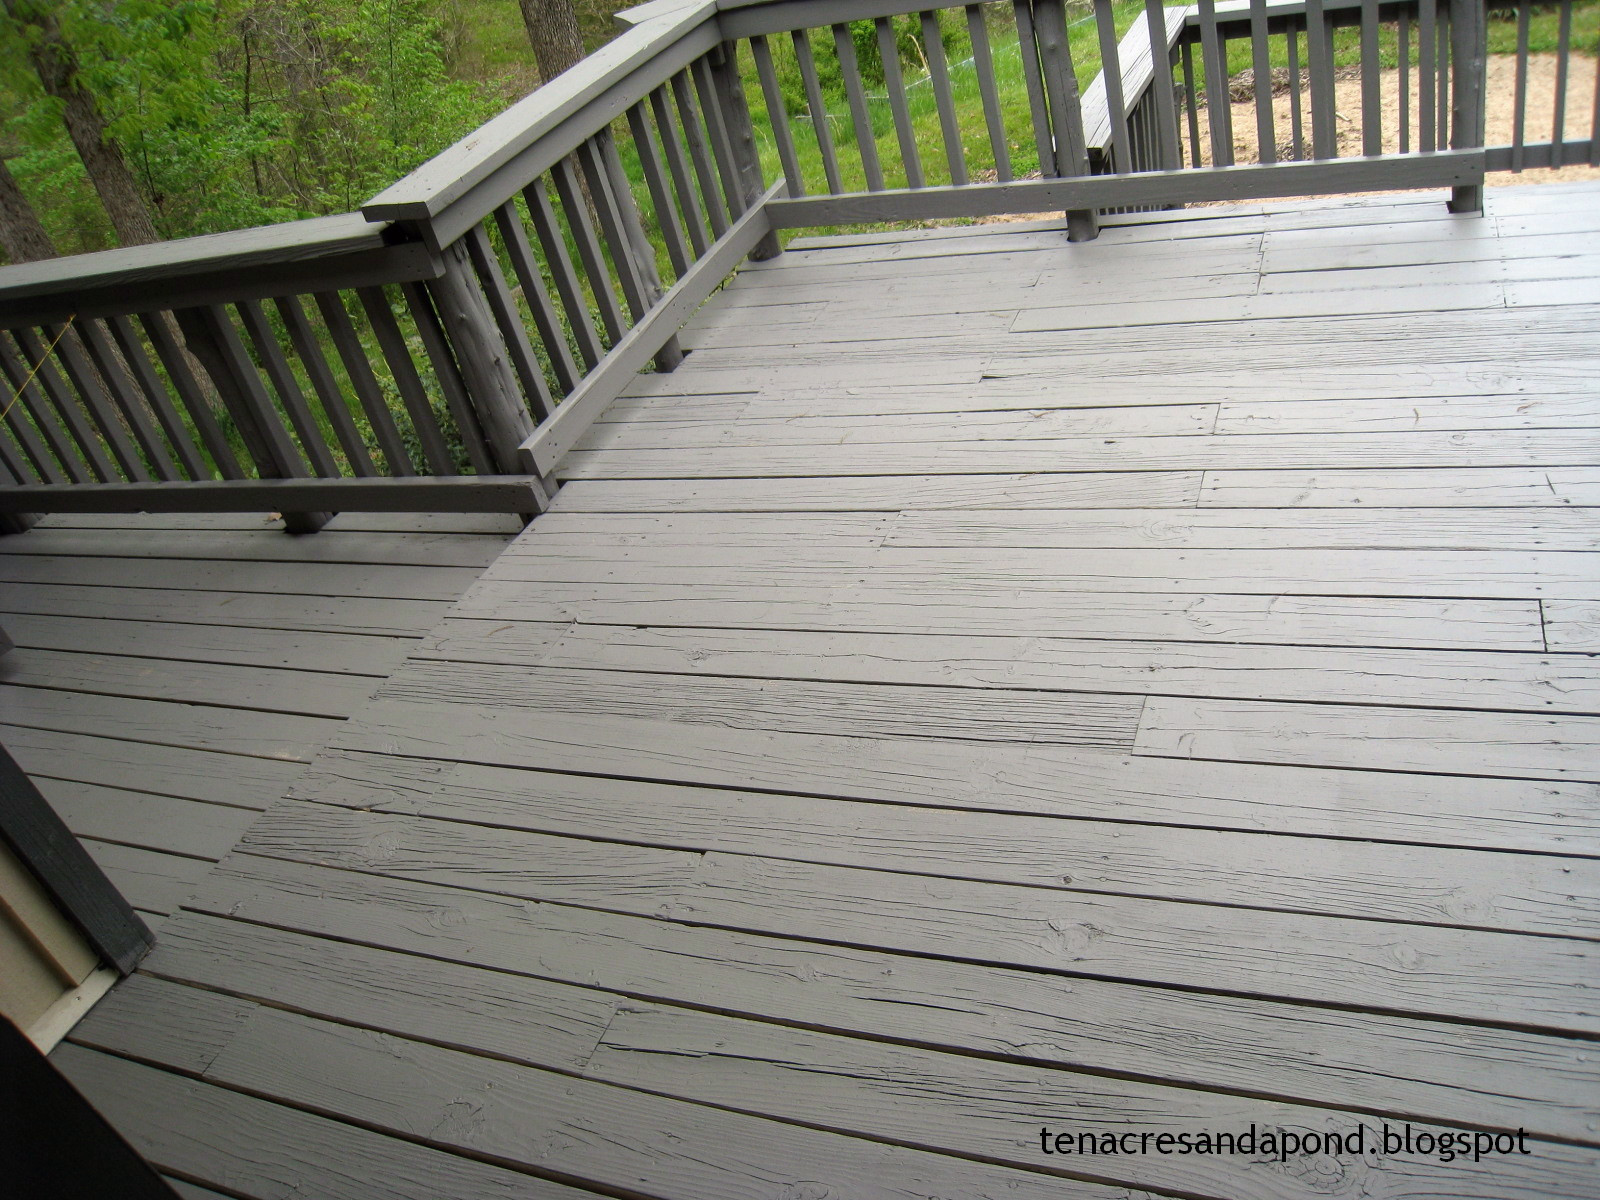 Behr Deck Paint
 Ten Acres and a Pond remembering